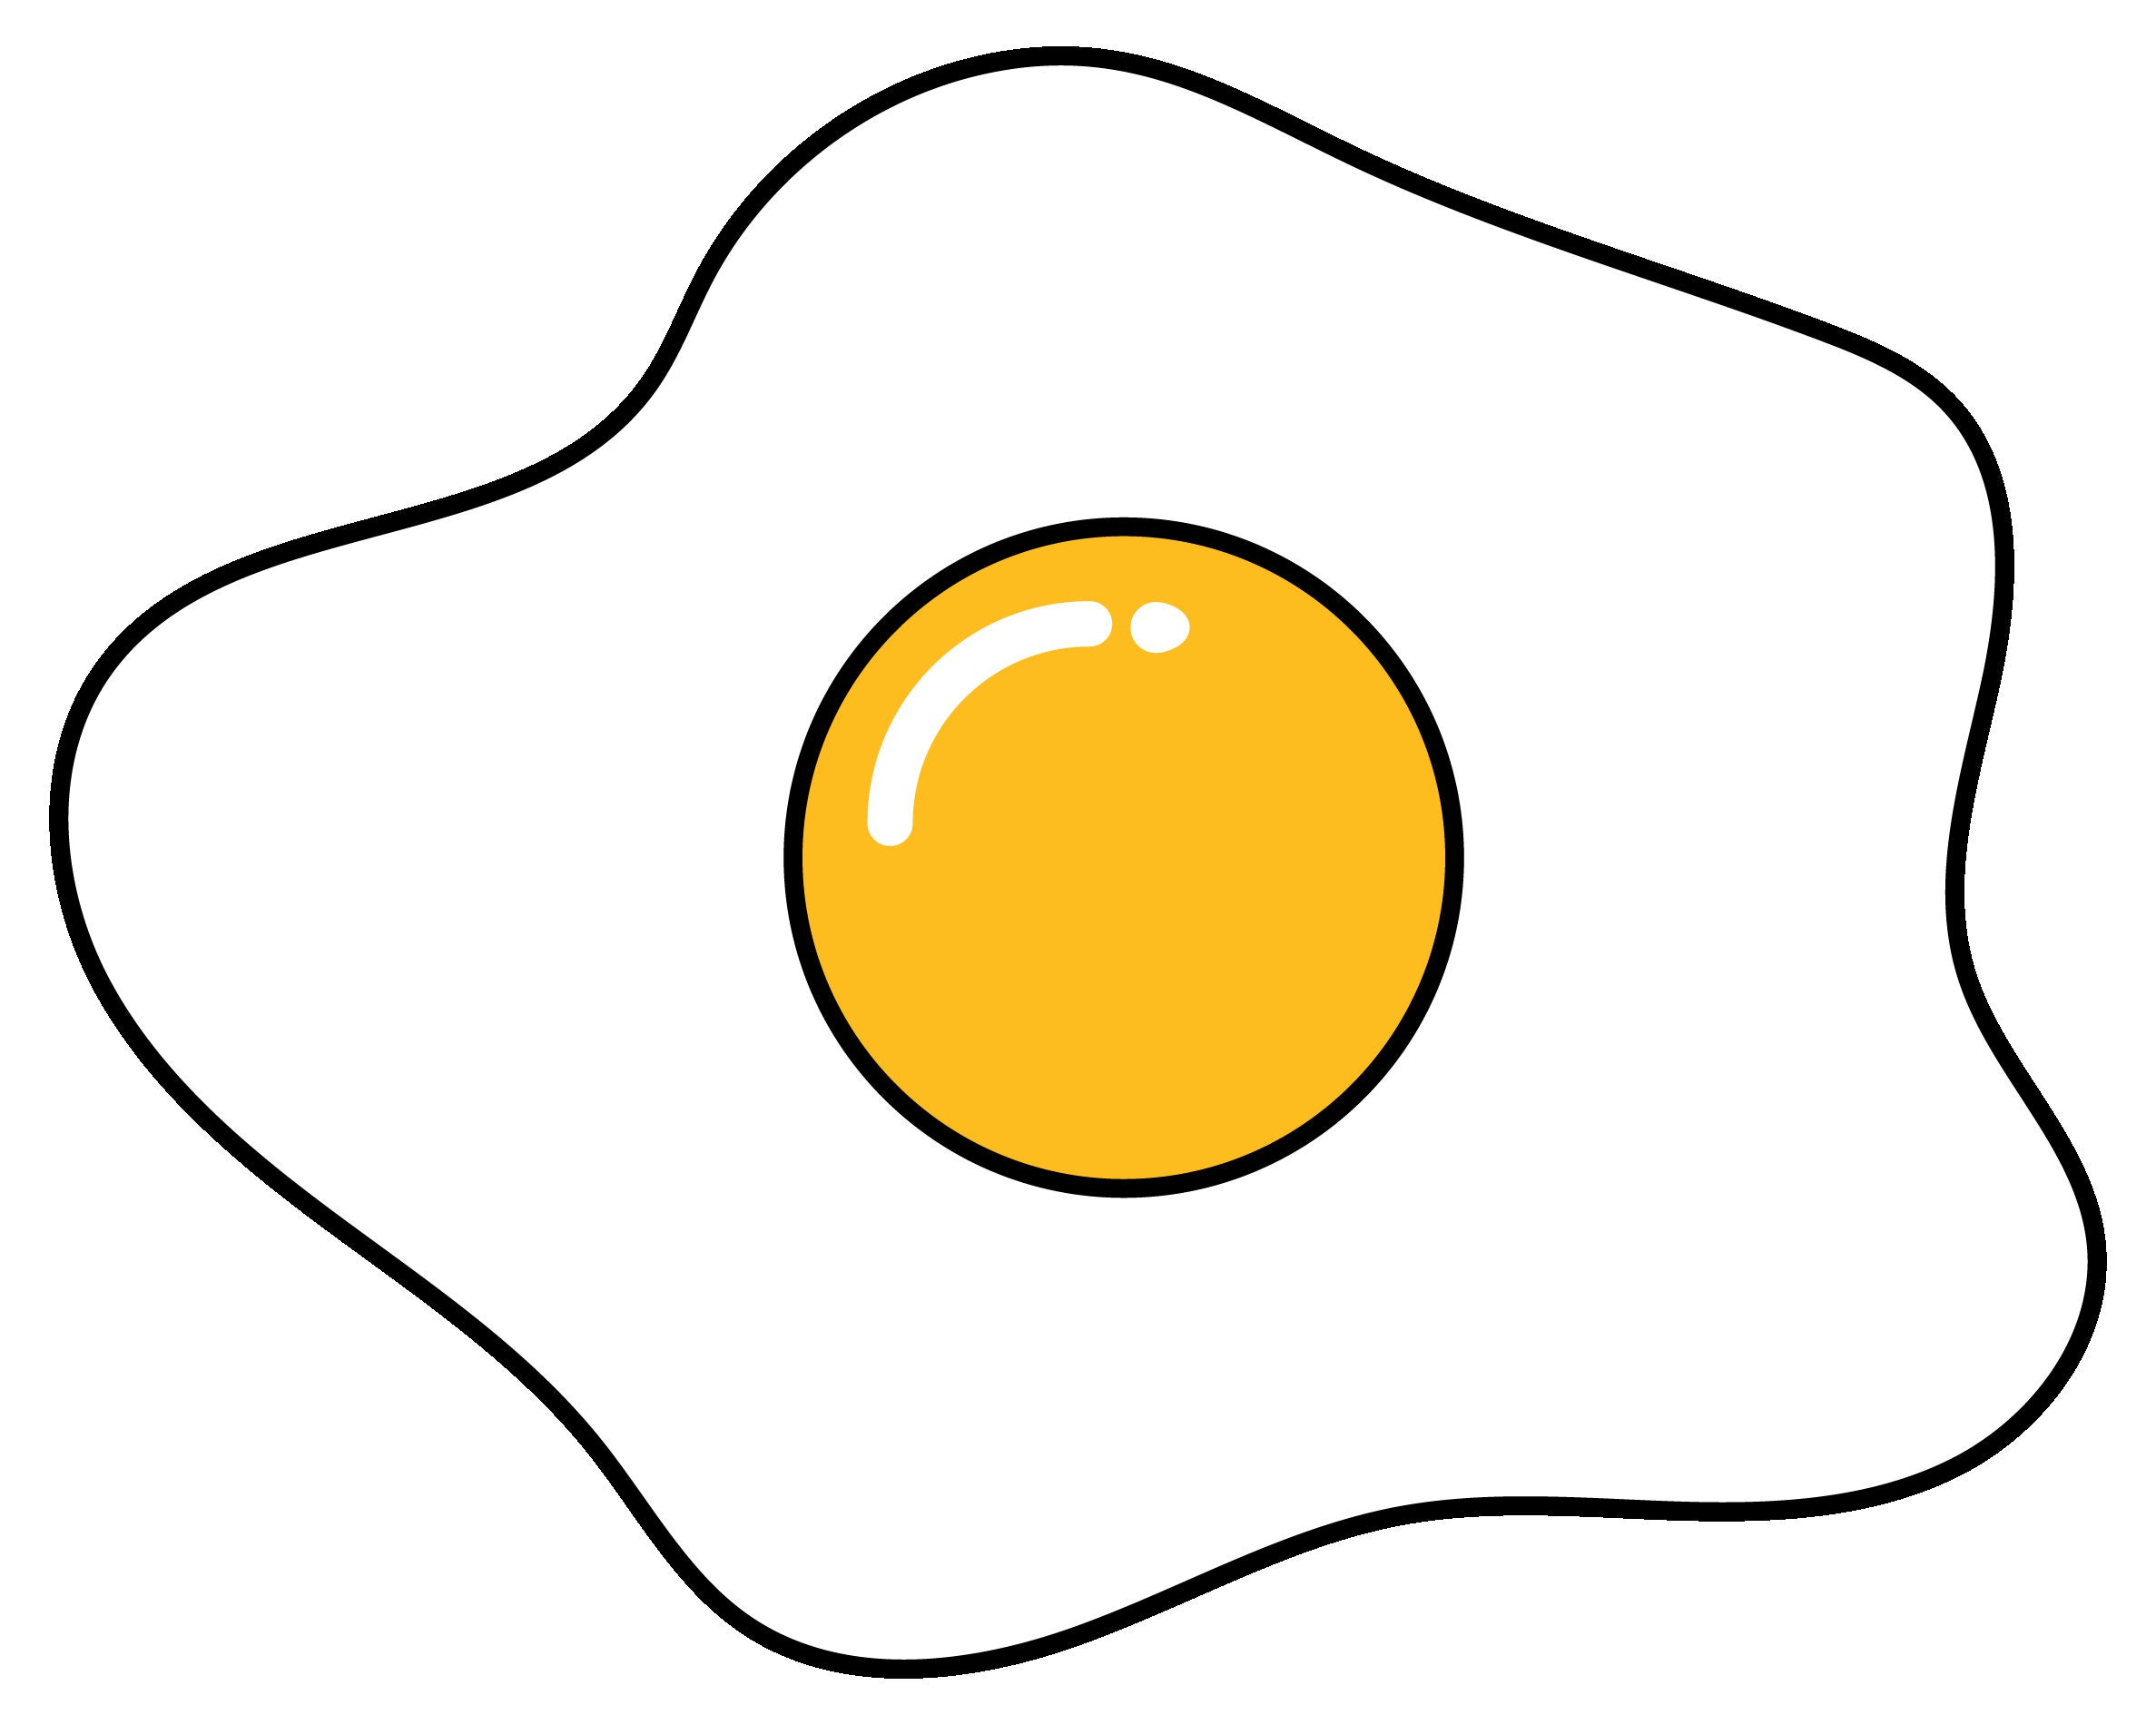 Egg Sunny Side Up Vector SVG Icon - SVG Repo